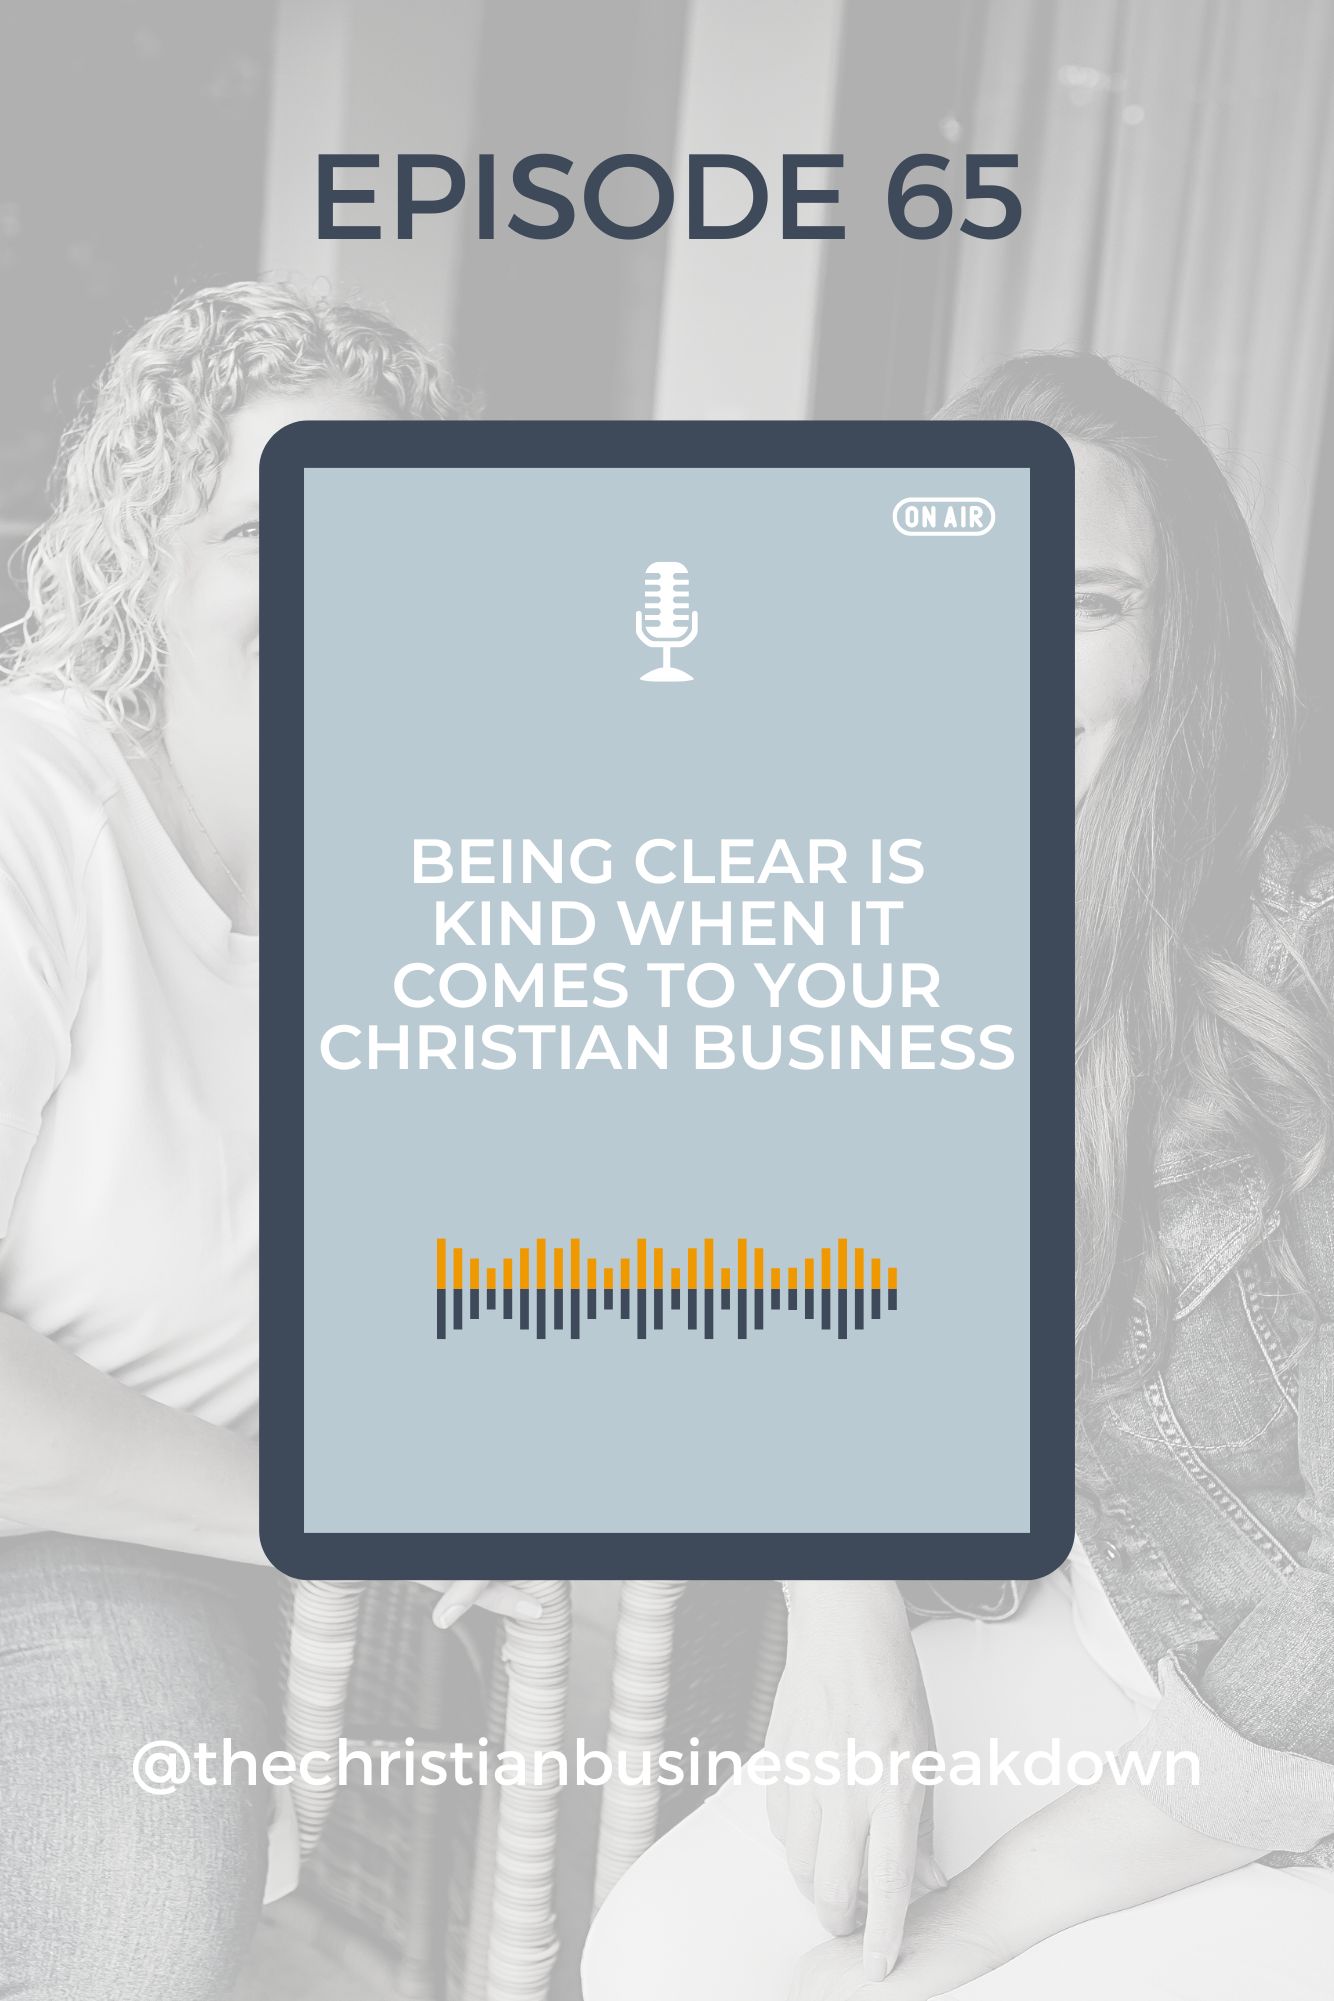 Two Christian women business owners and podcasters sit looking at a graphic that is talking about being clear and kind in your business.